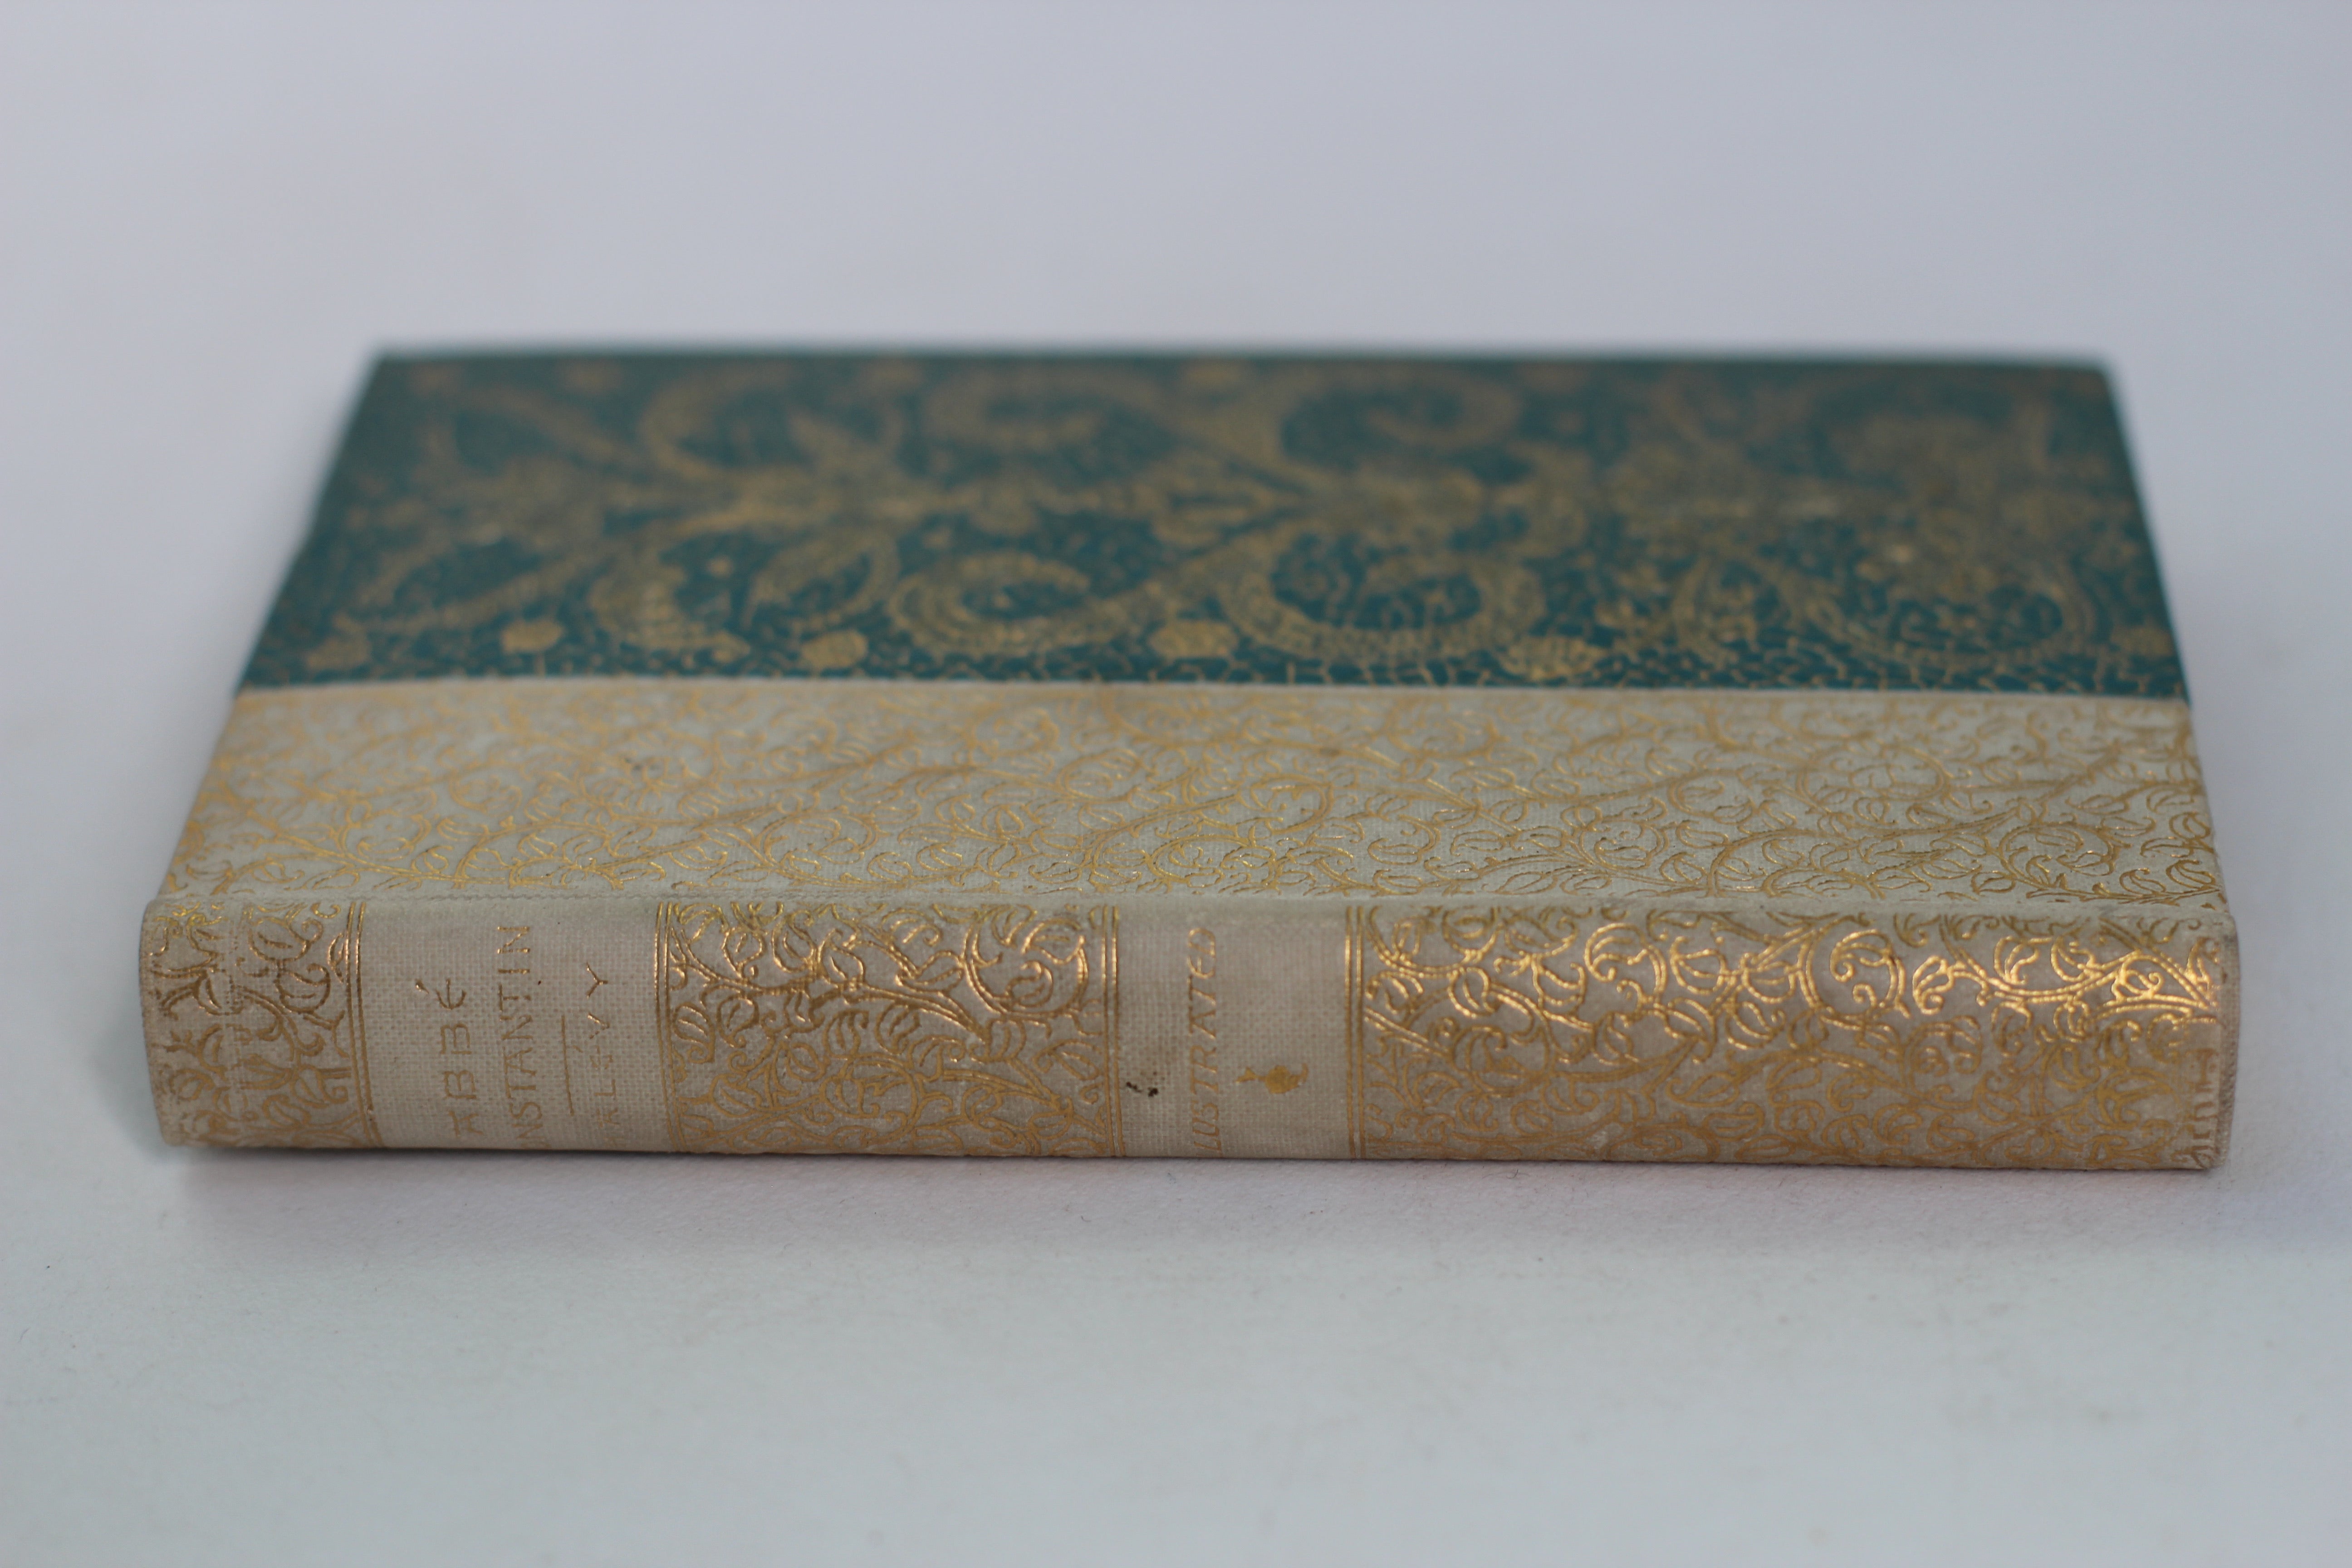 Antique Book, The Abbe’ Constantin by Ludovic Hale’vy, 1891, Hardback